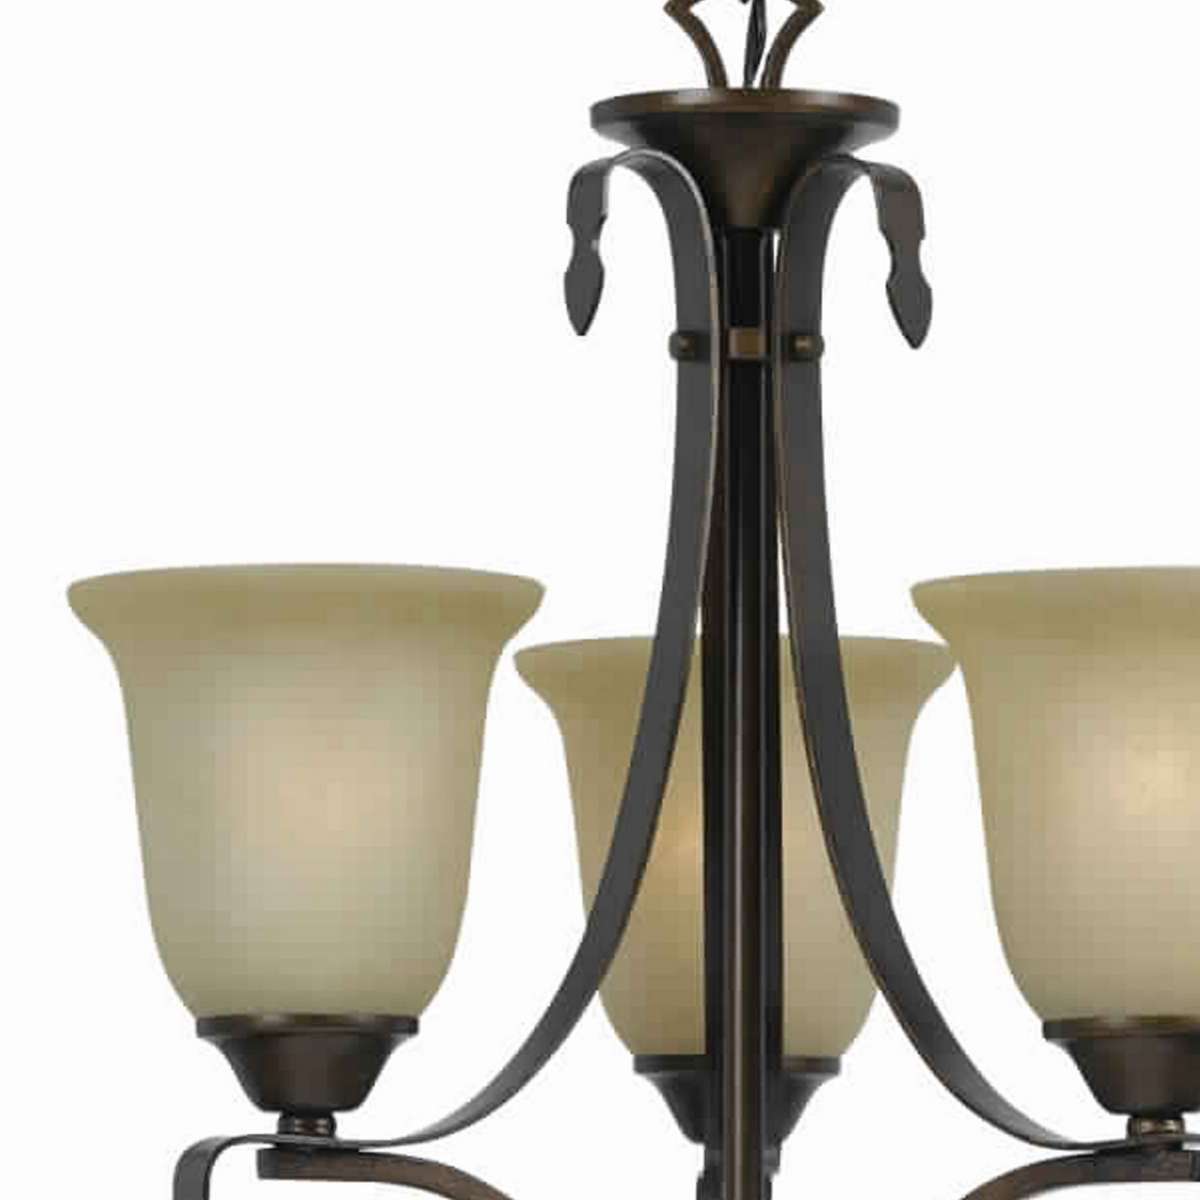 3 Bulb Uplight Chandelier With Metal Frame And Glass Shade,Bronze And Beige By Benzara